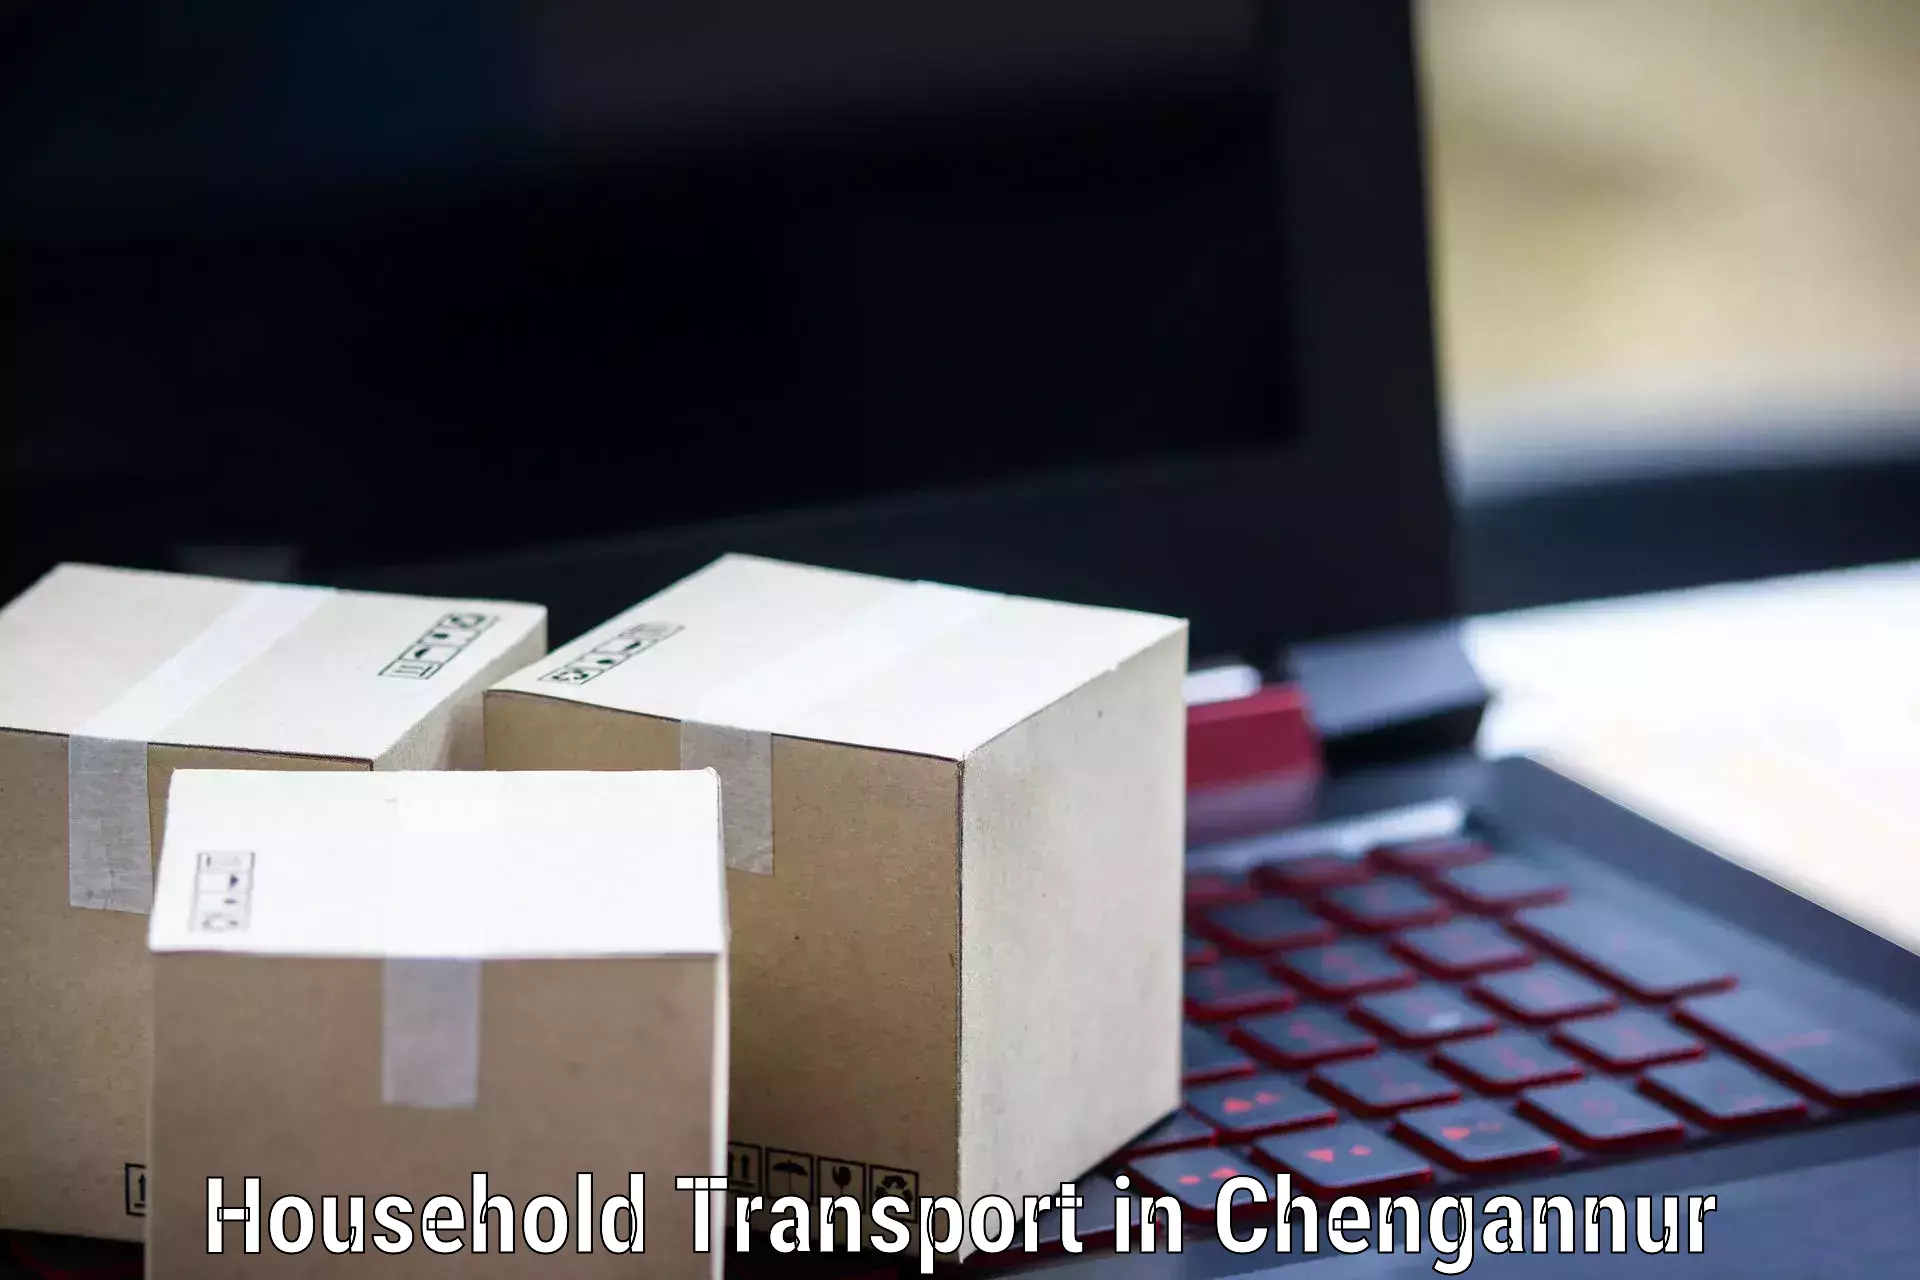 Household transport solutions in Chengannur